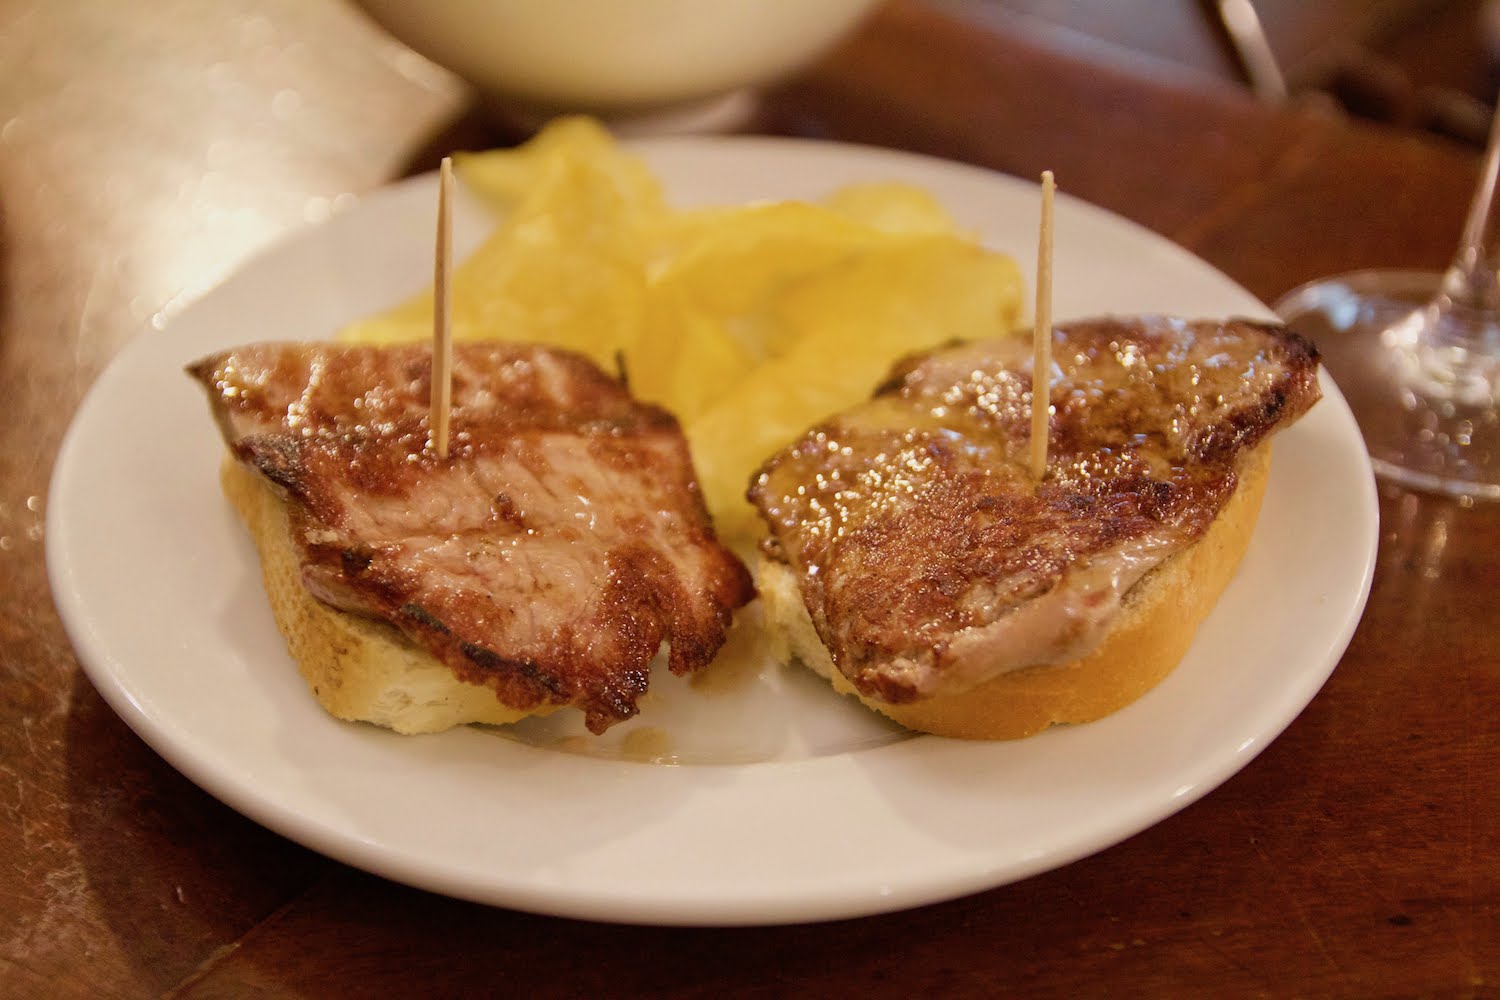 Try the solomillo at Gandarias, one of the best places to eat in San Sebastian on Mondays!